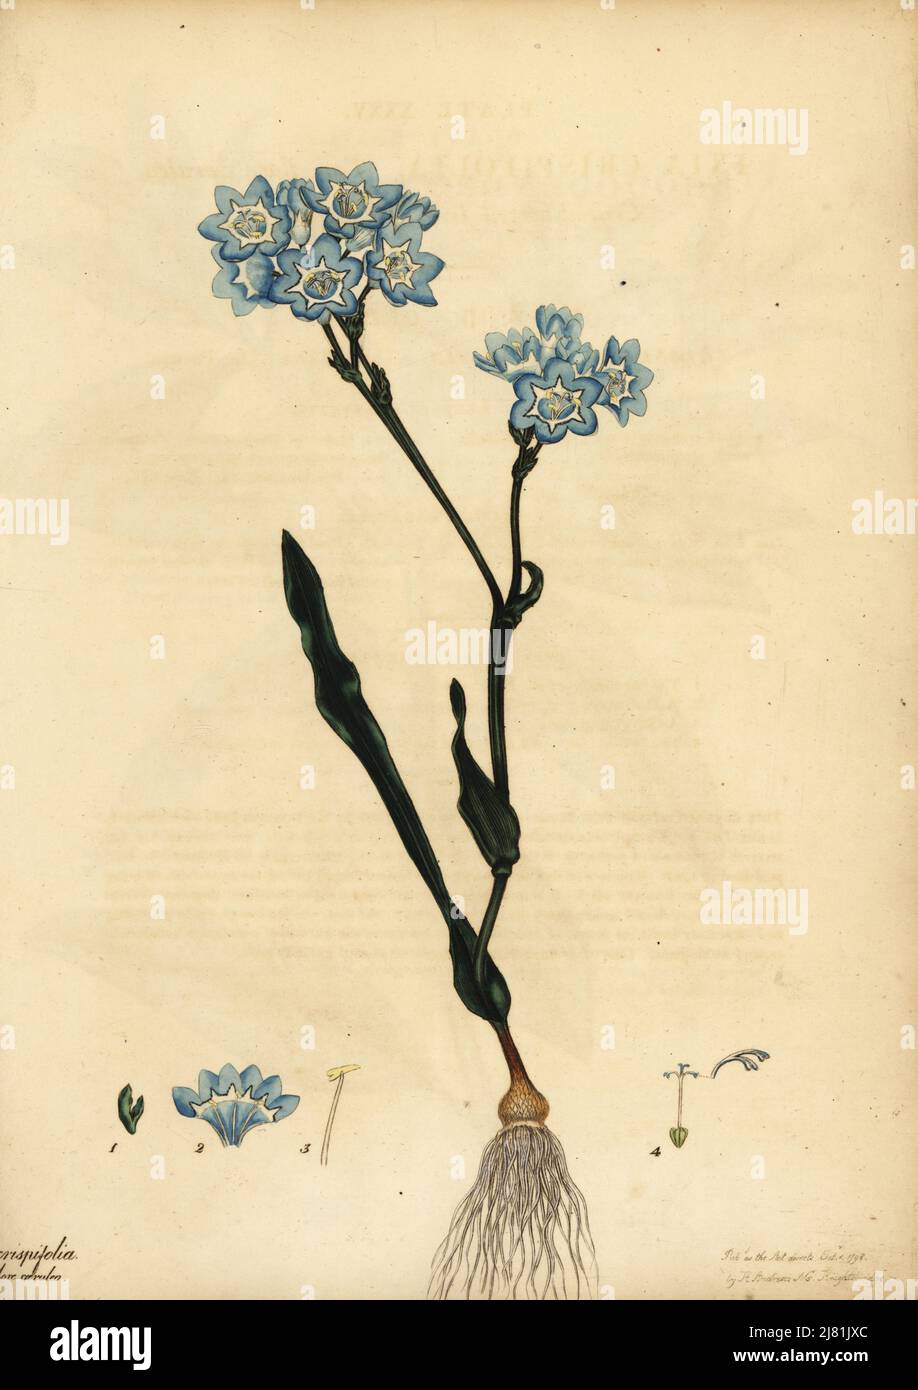 Bloucabong, Lapeirousia corymbosa. Crisped-leaved ixia, blue variety, Ixia crispifolia var. flore caeruleo. Copperplate engraving drawn, engraved and hand-coloured by Henry Andrews from his Botanical Register, Volume 1, published in London, 1799. Stock Photo